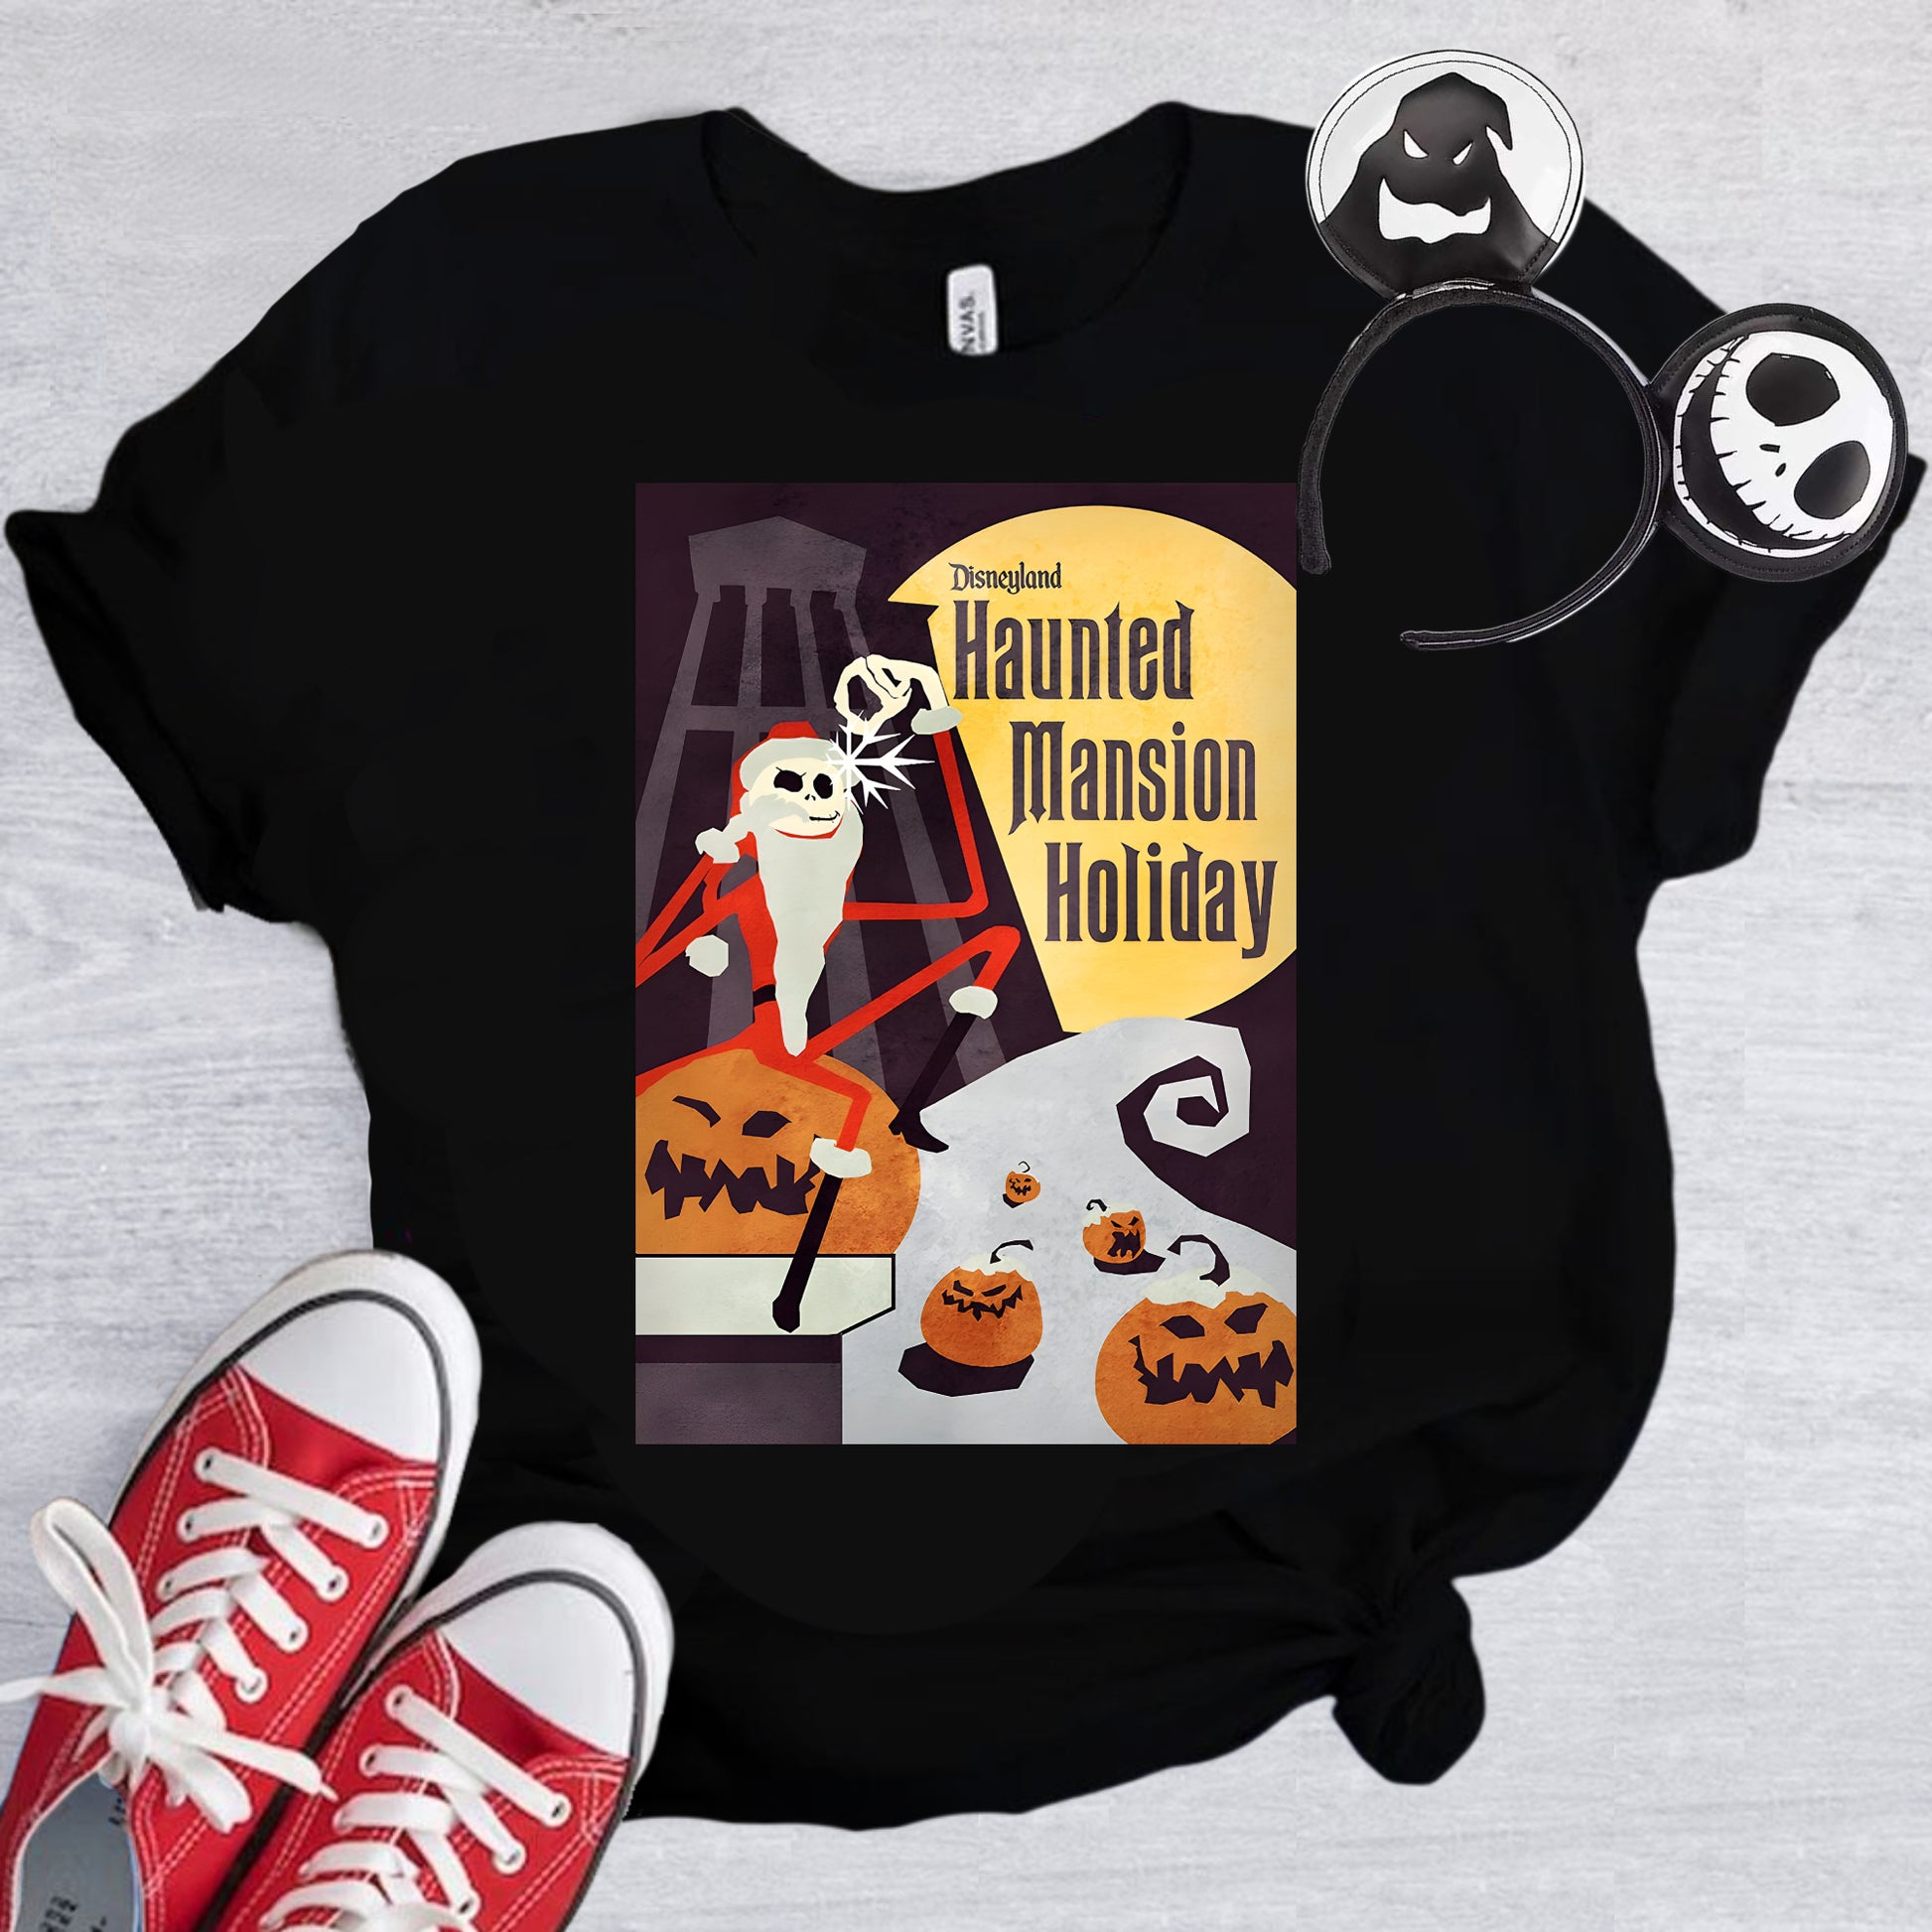 Haunted Mansion holiday Nightmare Before Christmas t shirt t-shirt